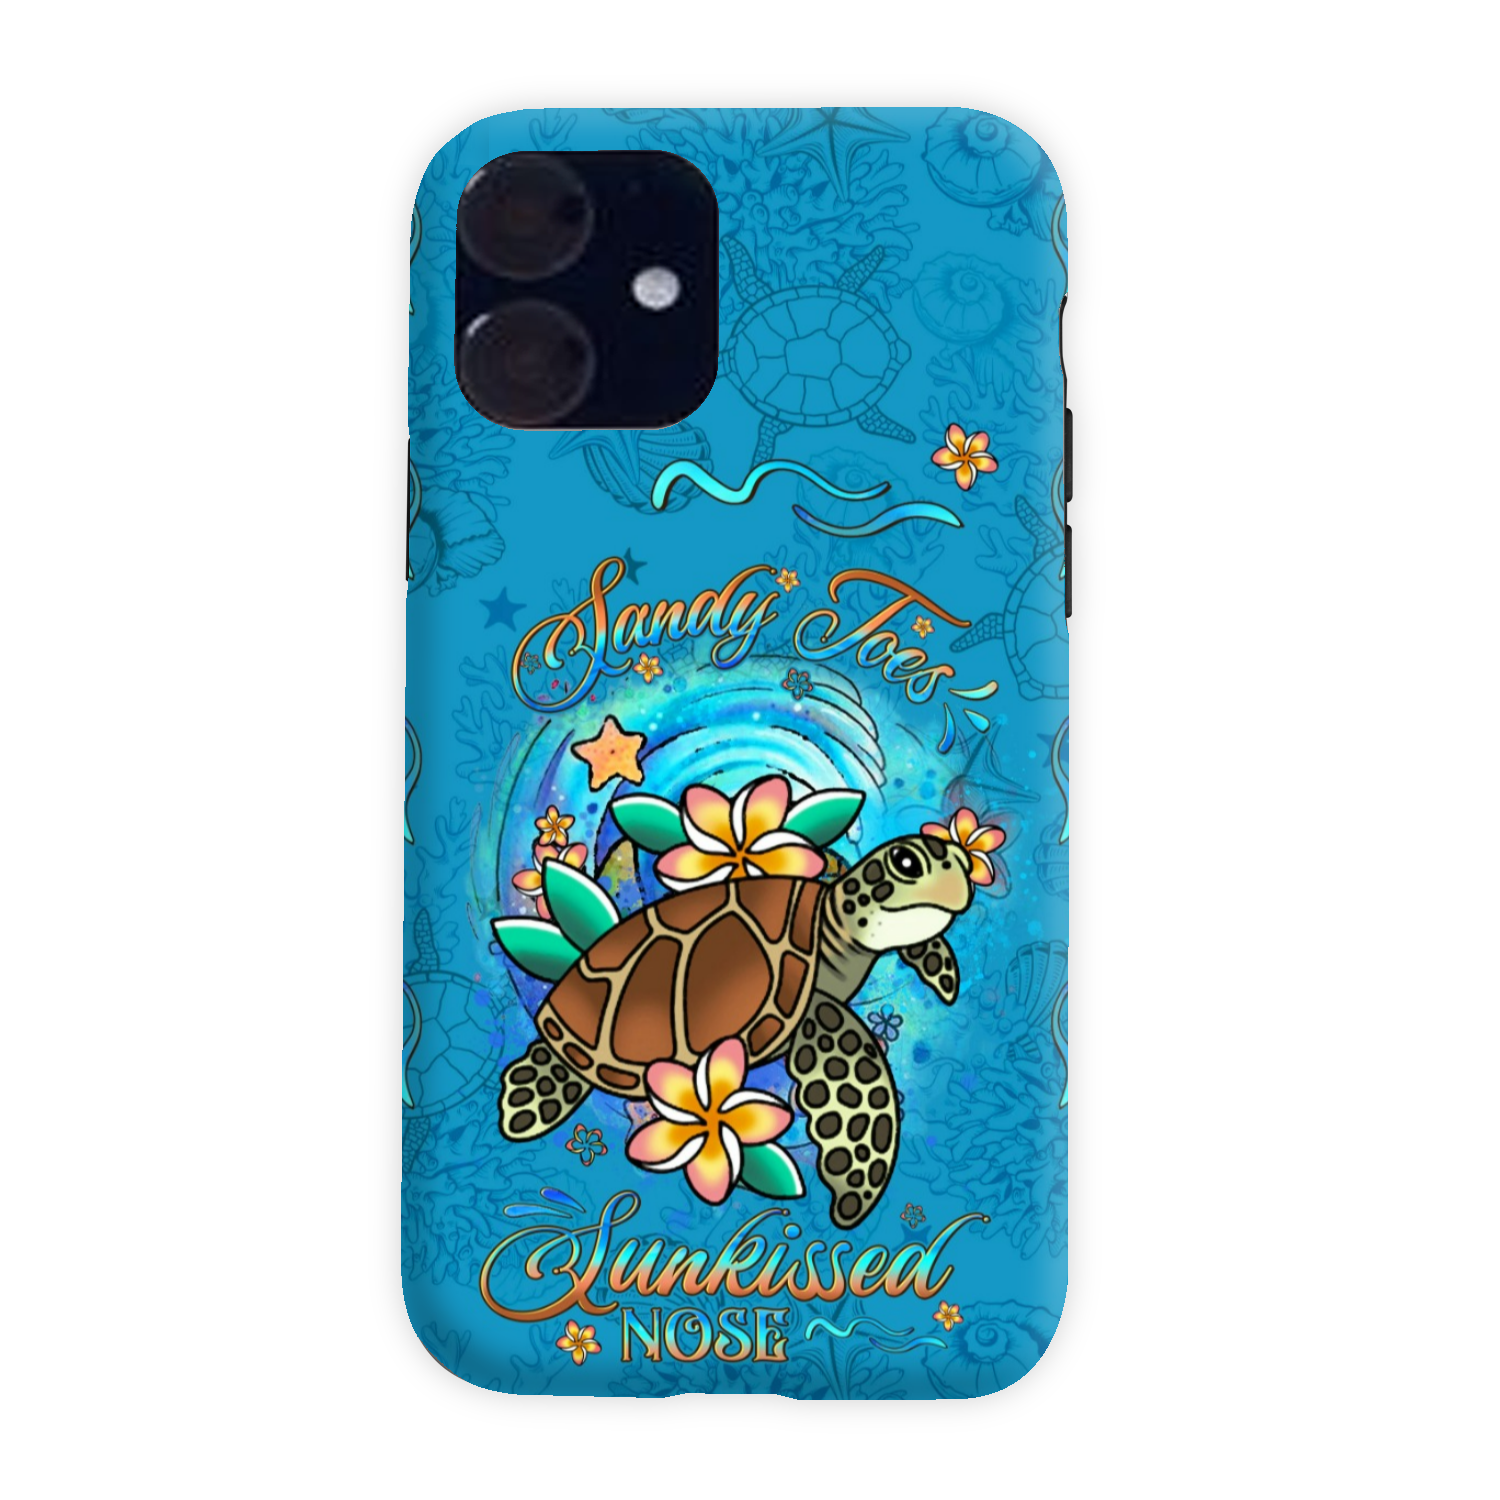 SANDY TOES SUNKISSED NOSE PHONE CASE - YHDU0906232